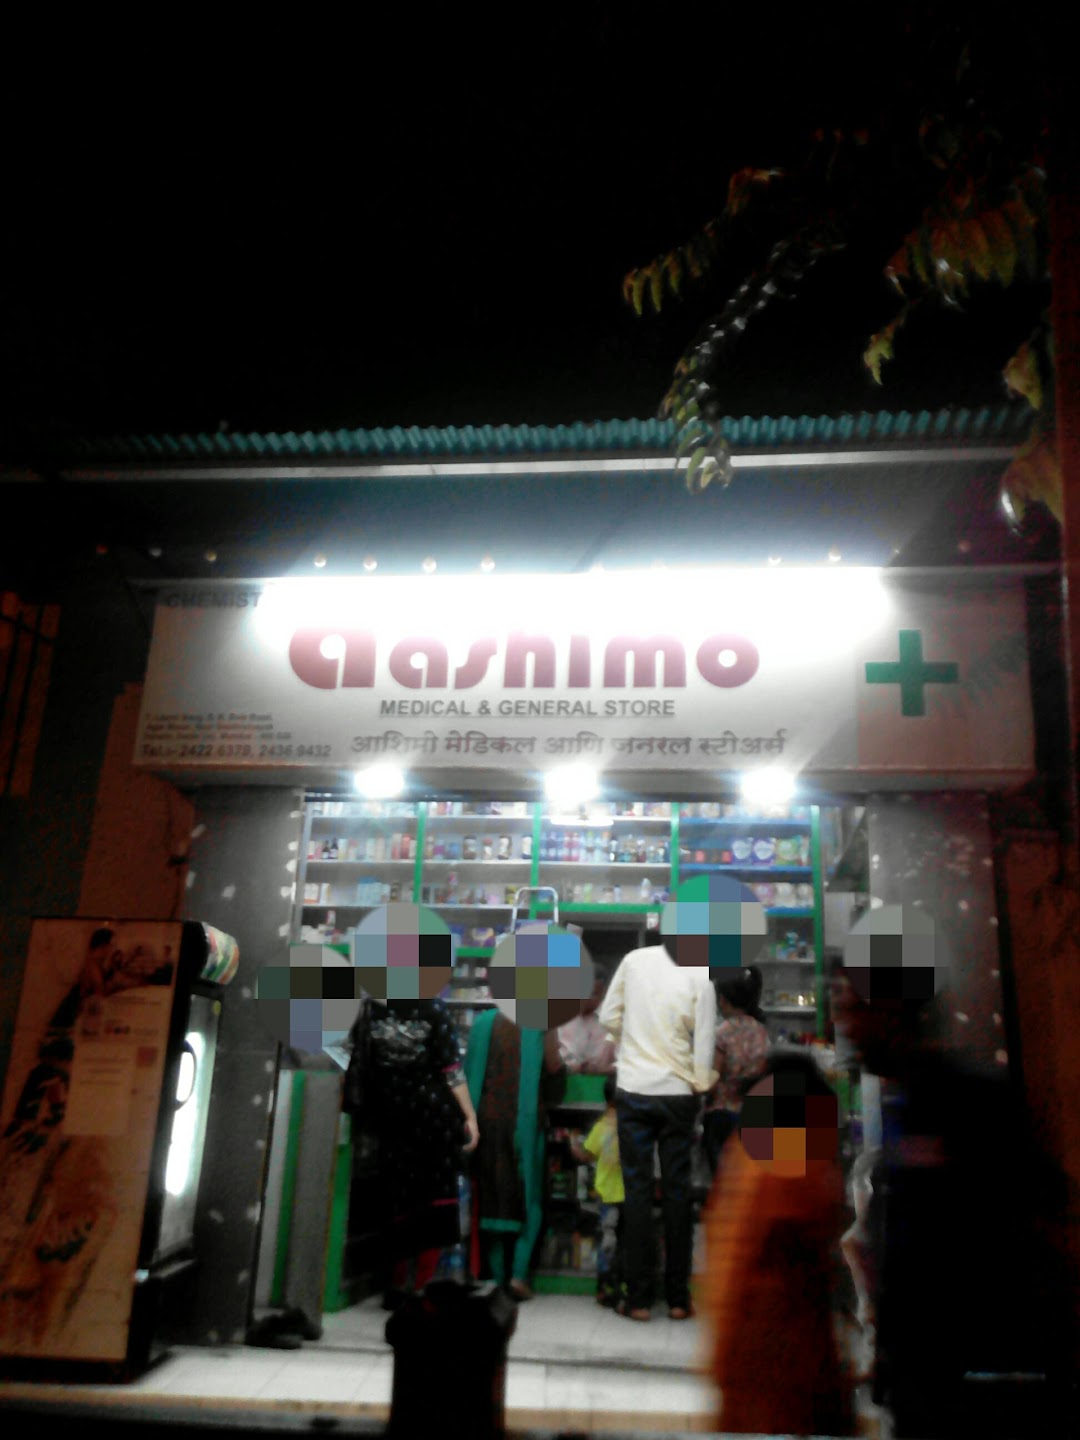 Aashimo Medical And General Stores